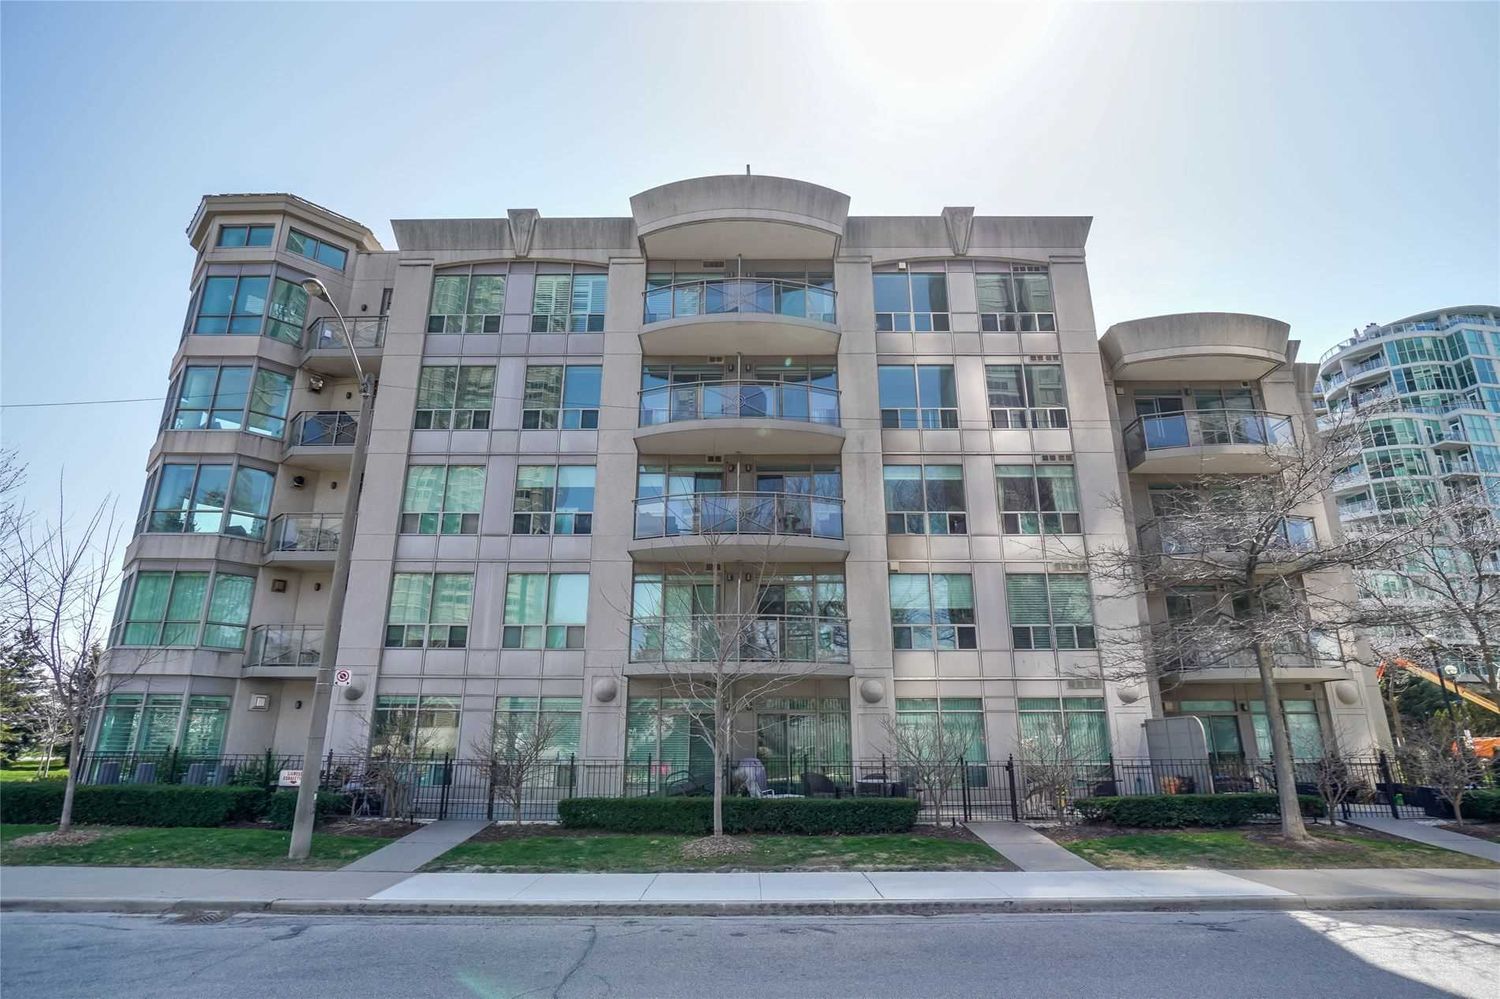 80 Palace Pier Court. Nevis Condos is located in  Etobicoke, Toronto - image #2 of 3